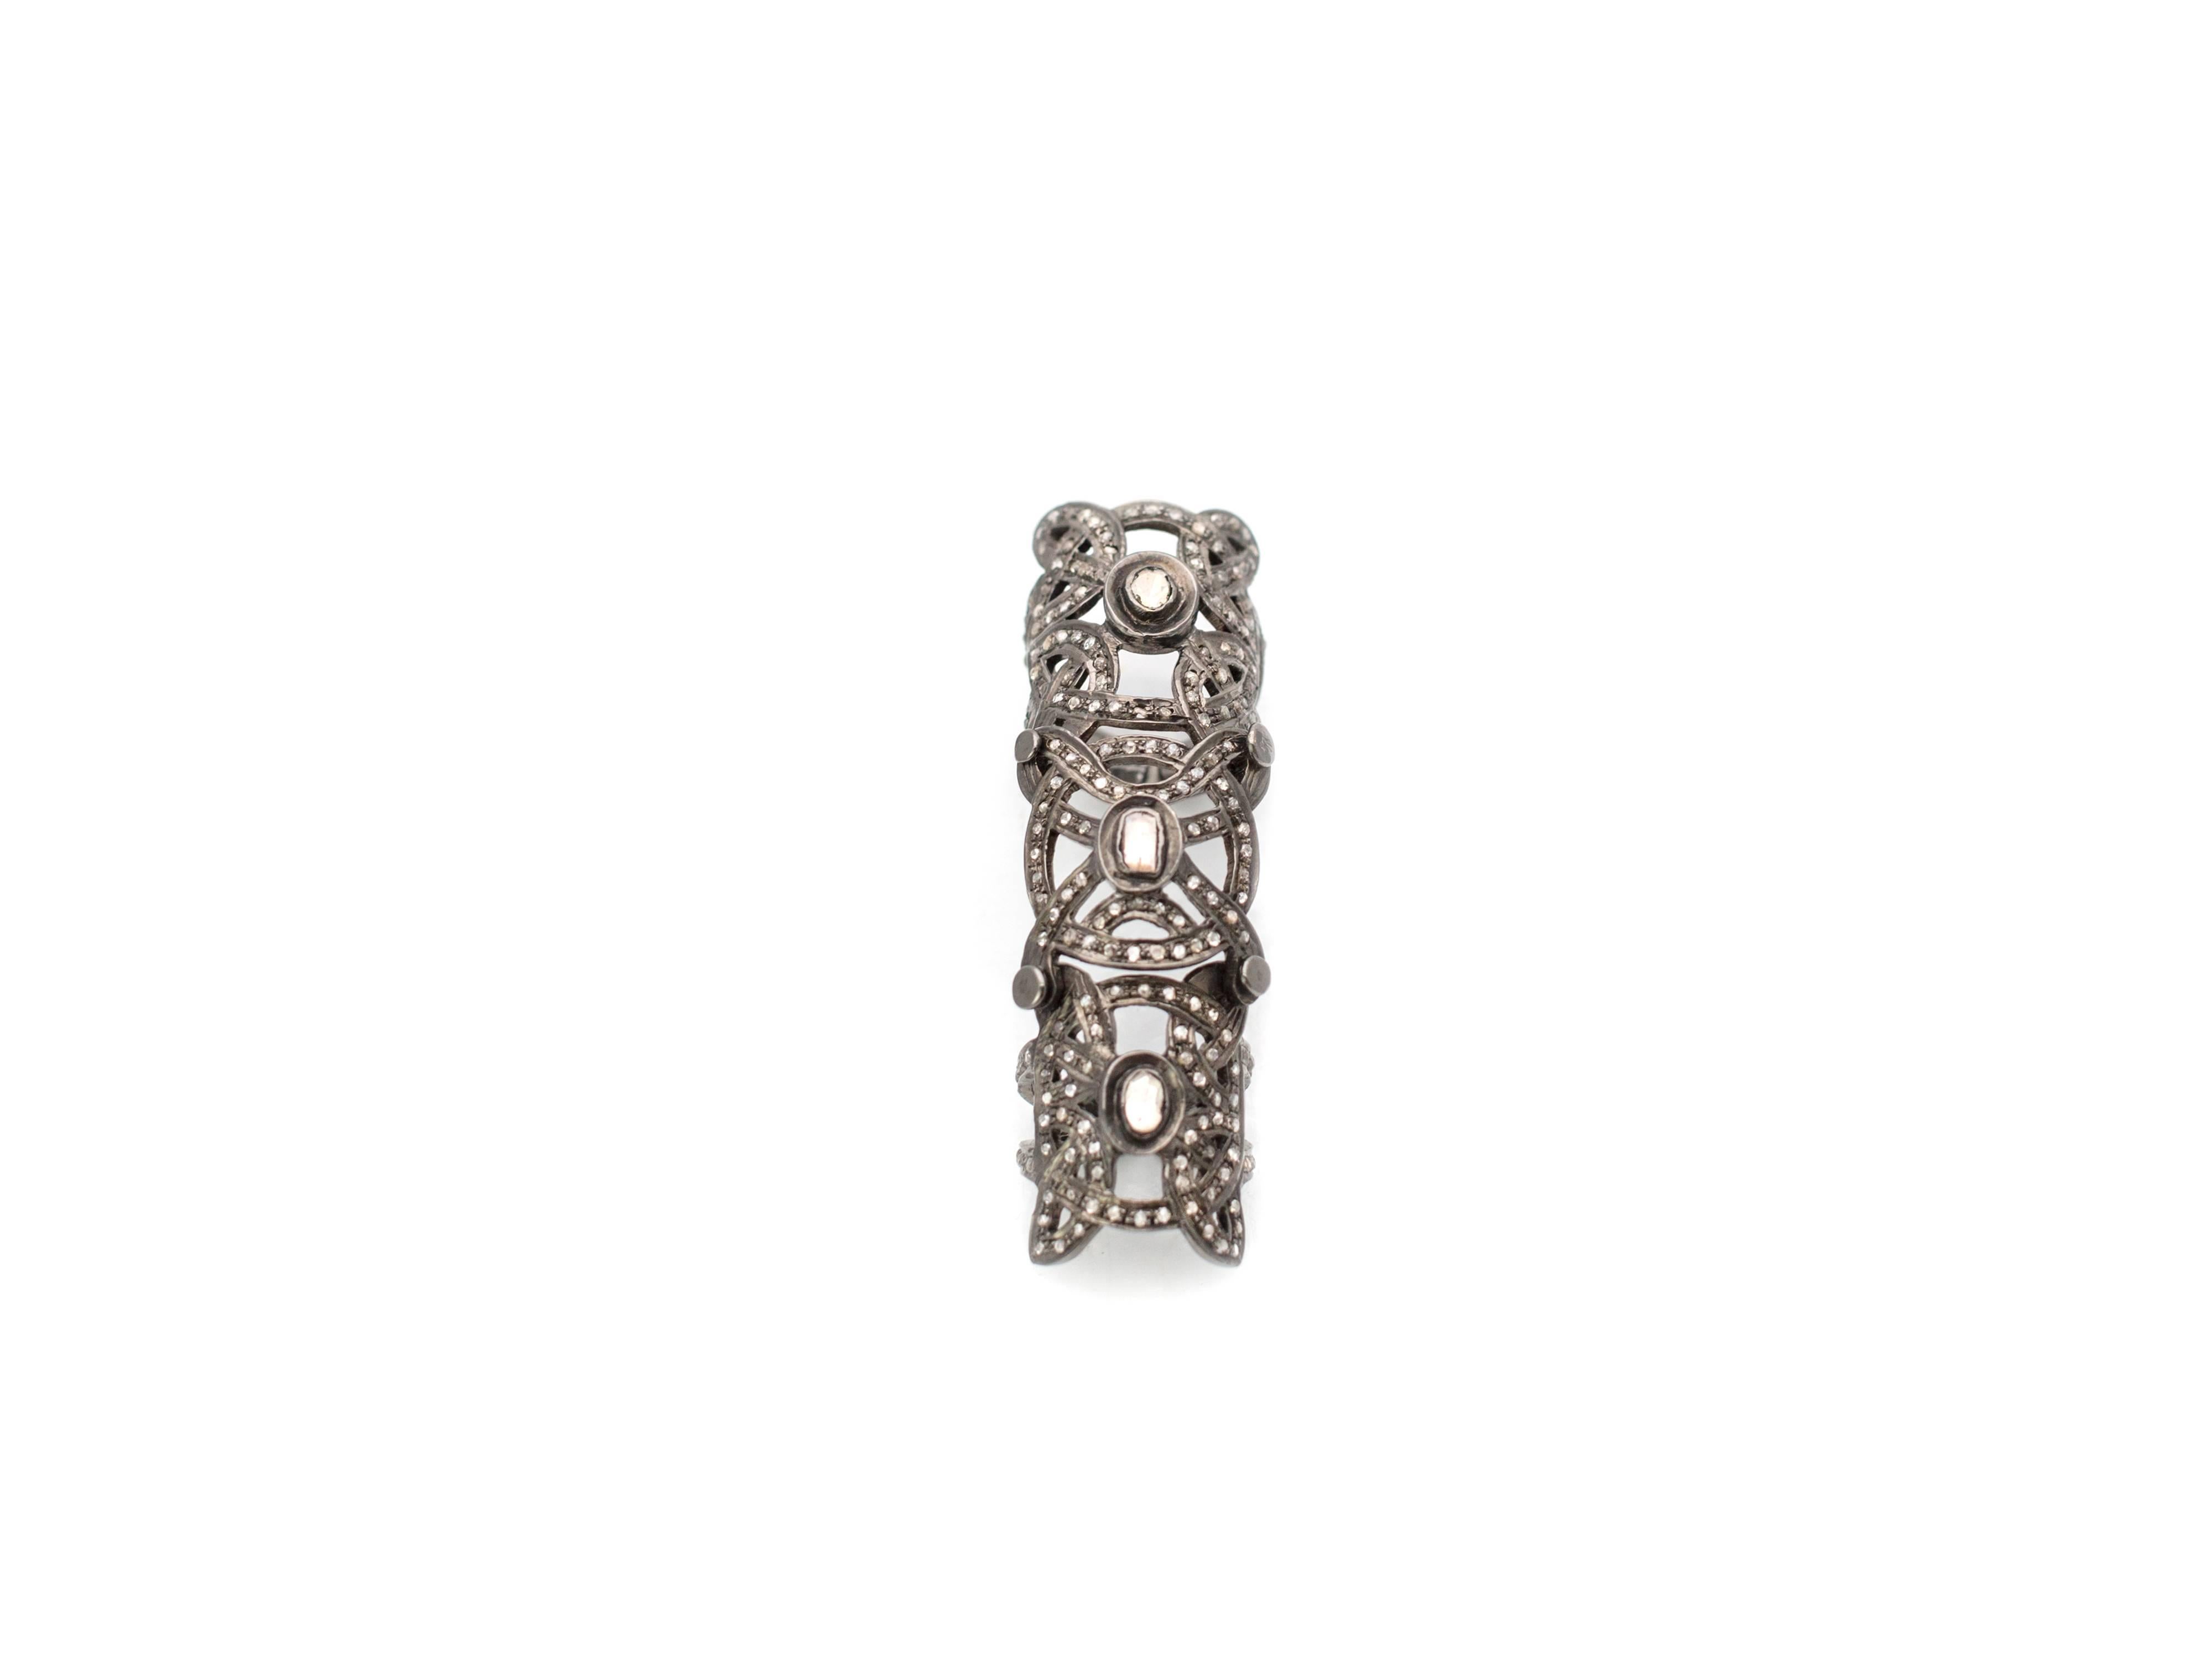 A contemporary interpretation of Medieval armor, this double knuckle ring from Samira13 is encrusted with 3.2 carats of pave and rose cut champagne diamonds set in black rhodium plated sterling silver. It speaks to power and beauty. Ring size 6.5,